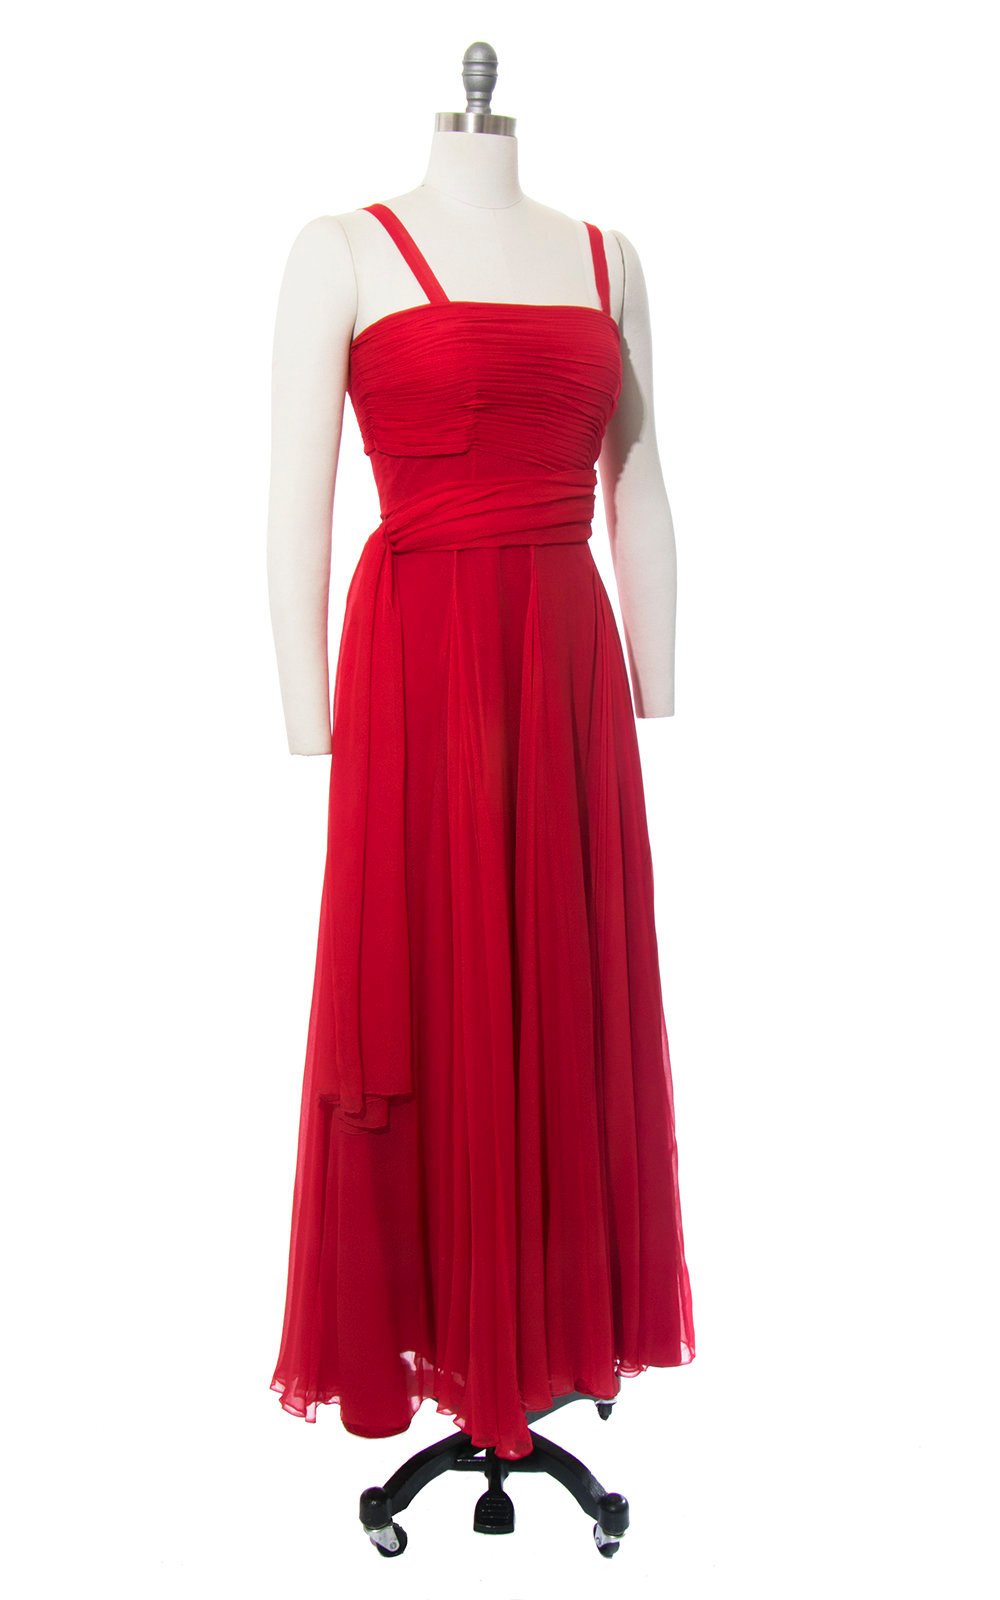 Vintage 1950s Dress | 50s Red Silk Chiffon Pleated Party Dress Full Length Holiday Evening Gown with Waterfall Sash (small)